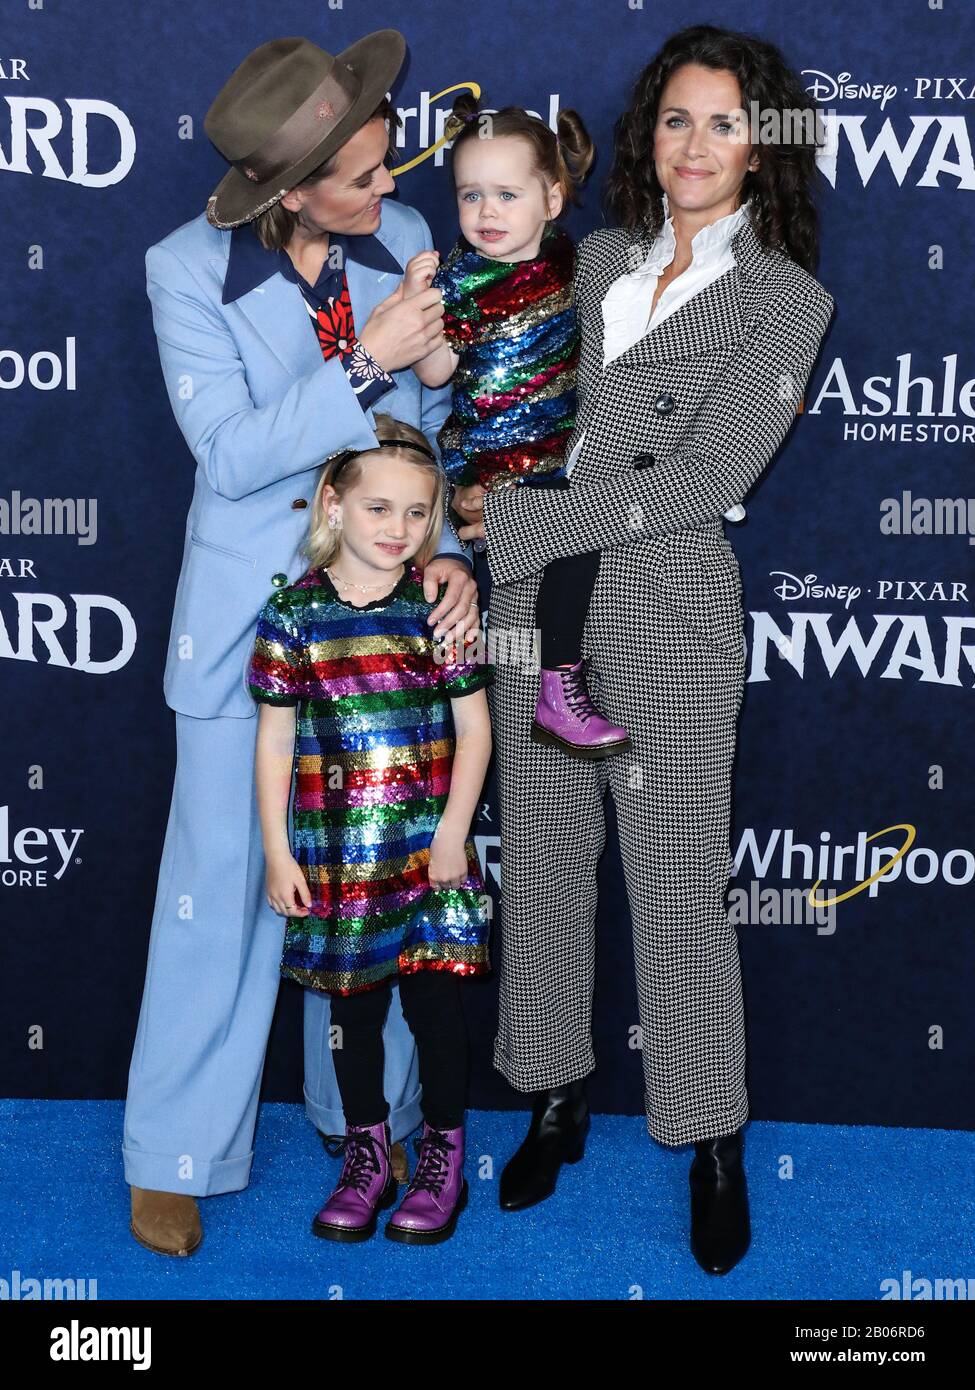 Hollywood, United States. 18th Feb, 2020.   Brandi Carlile, Evangeline Ruth Carlile, Elijah Carlile and Catherine Shepherd arrive at the World Premiere Of Disney And Pixar's 'Onward' held at the El Capitan Theatre on February 18, 2020 in Hollywood, Los Angeles, California, United States. (Photo by Xavier Collin/Image Press Agency) Credit: Image Press Agency/Alamy Live News Stock Photo